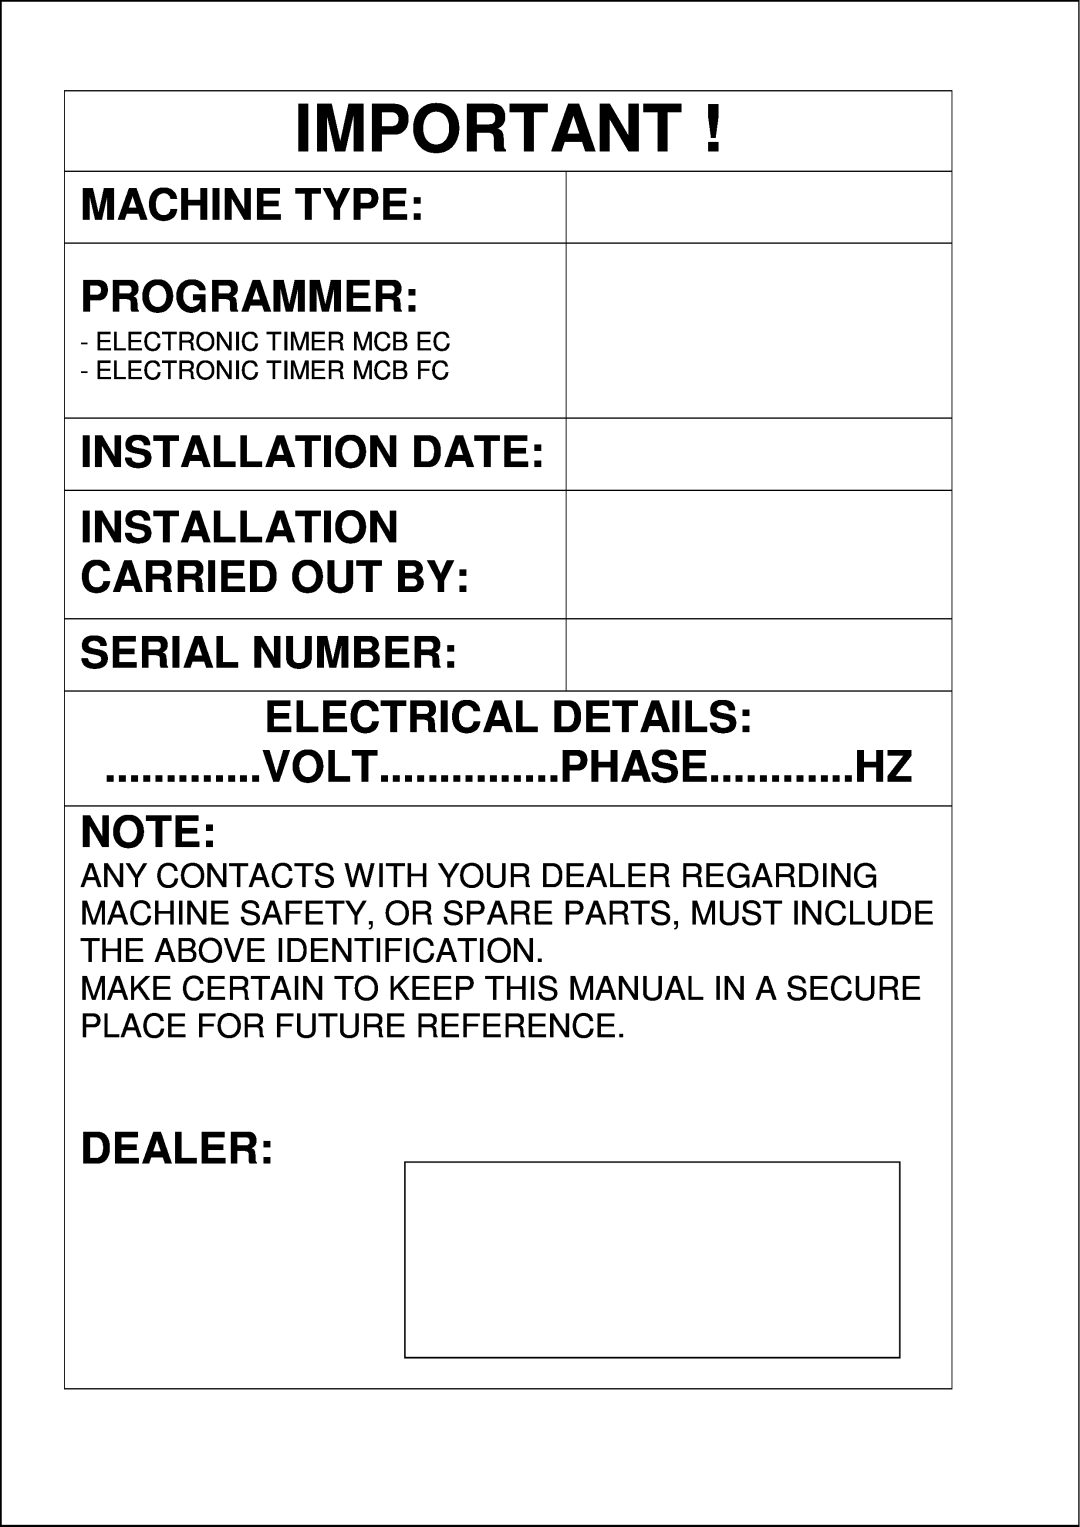 Maytag MFS 25-35 Machine Type Programmer, Installation Date Installation Carried Out By, Serial Number Electrical Details 